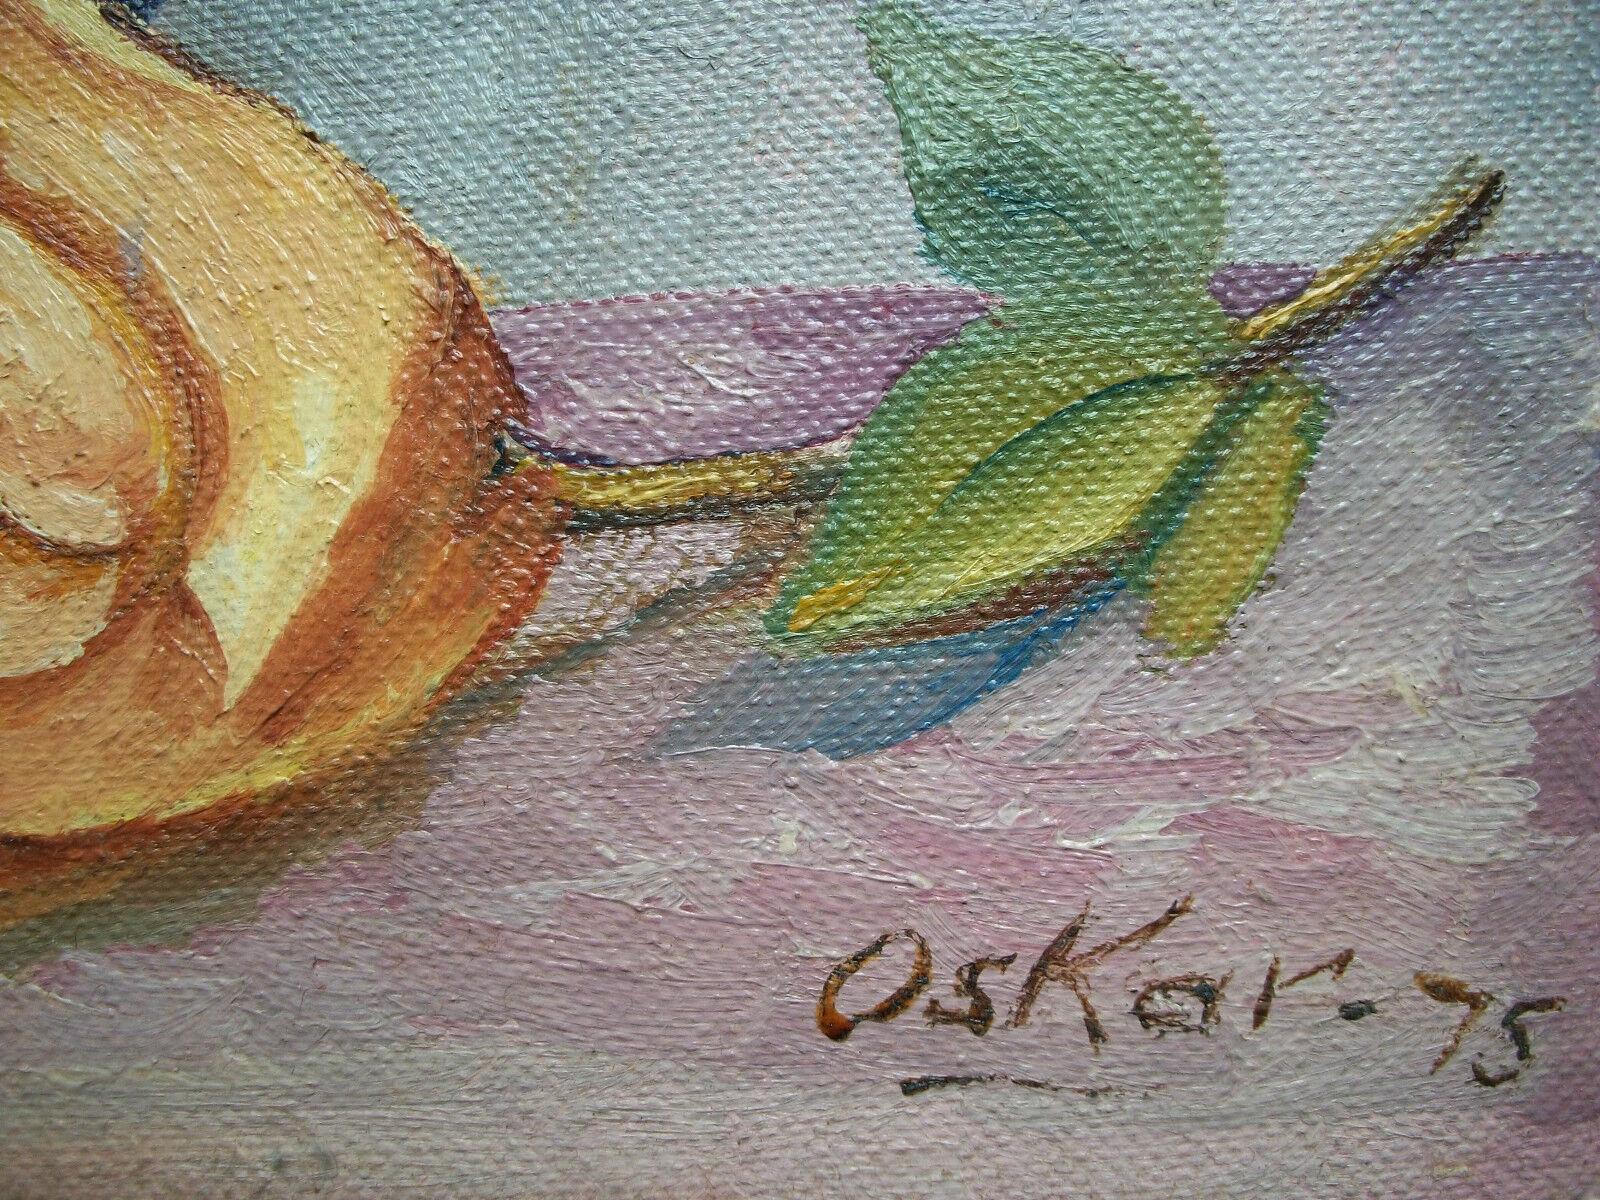 OSKAR - Vintage floral still life oil painting on artist's canvas board - signed and dated - unframed - Canada - circa 1975.

Excellent vintage condition - no loss - no damage - no restoration - surface grime from age and use - ready to frame.

Size